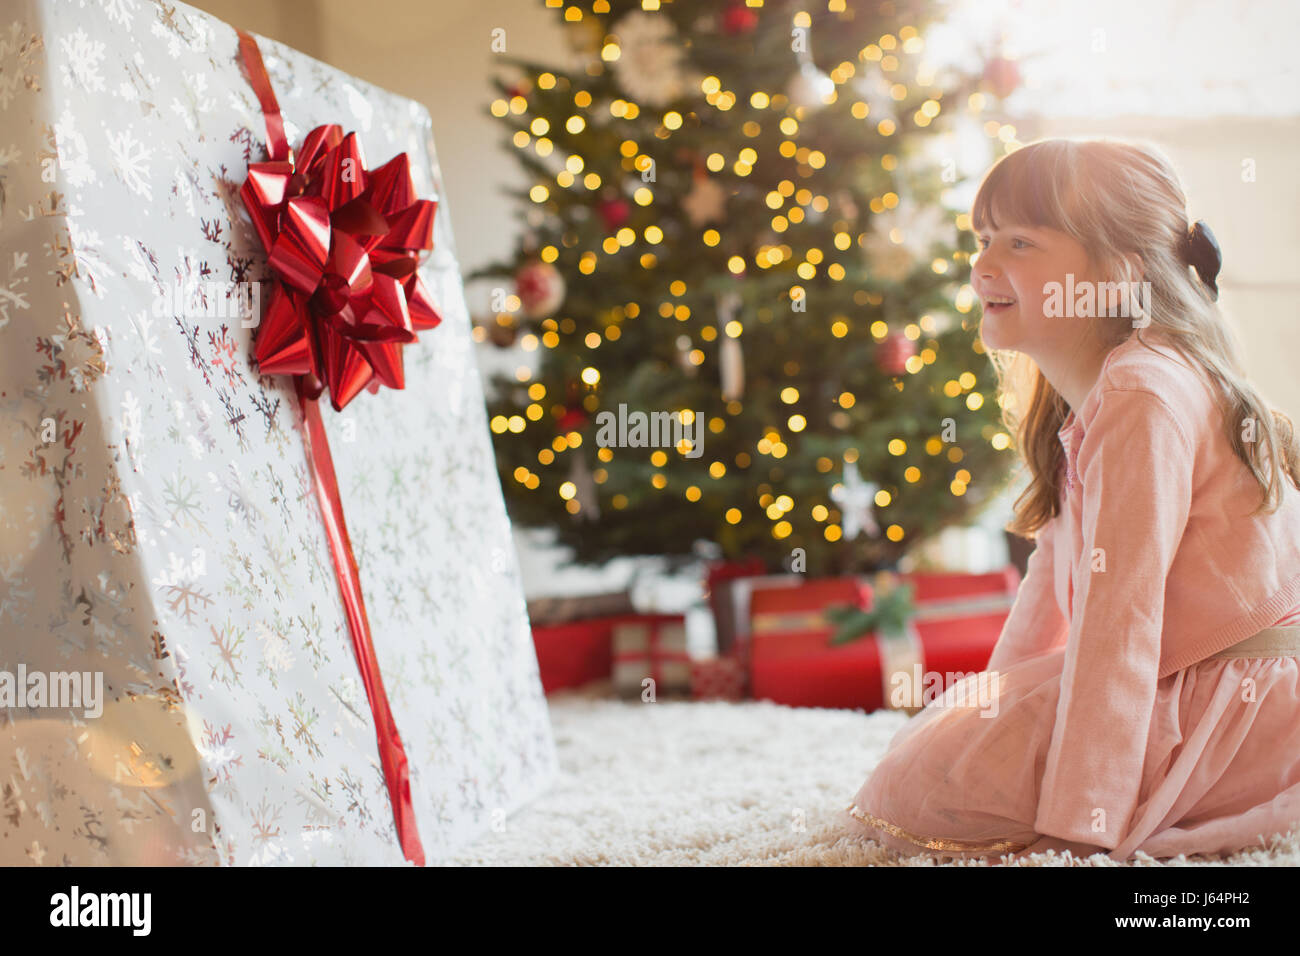 Girl smiling in anticipation at large Christmas gift near Christmas tree Stock Photo